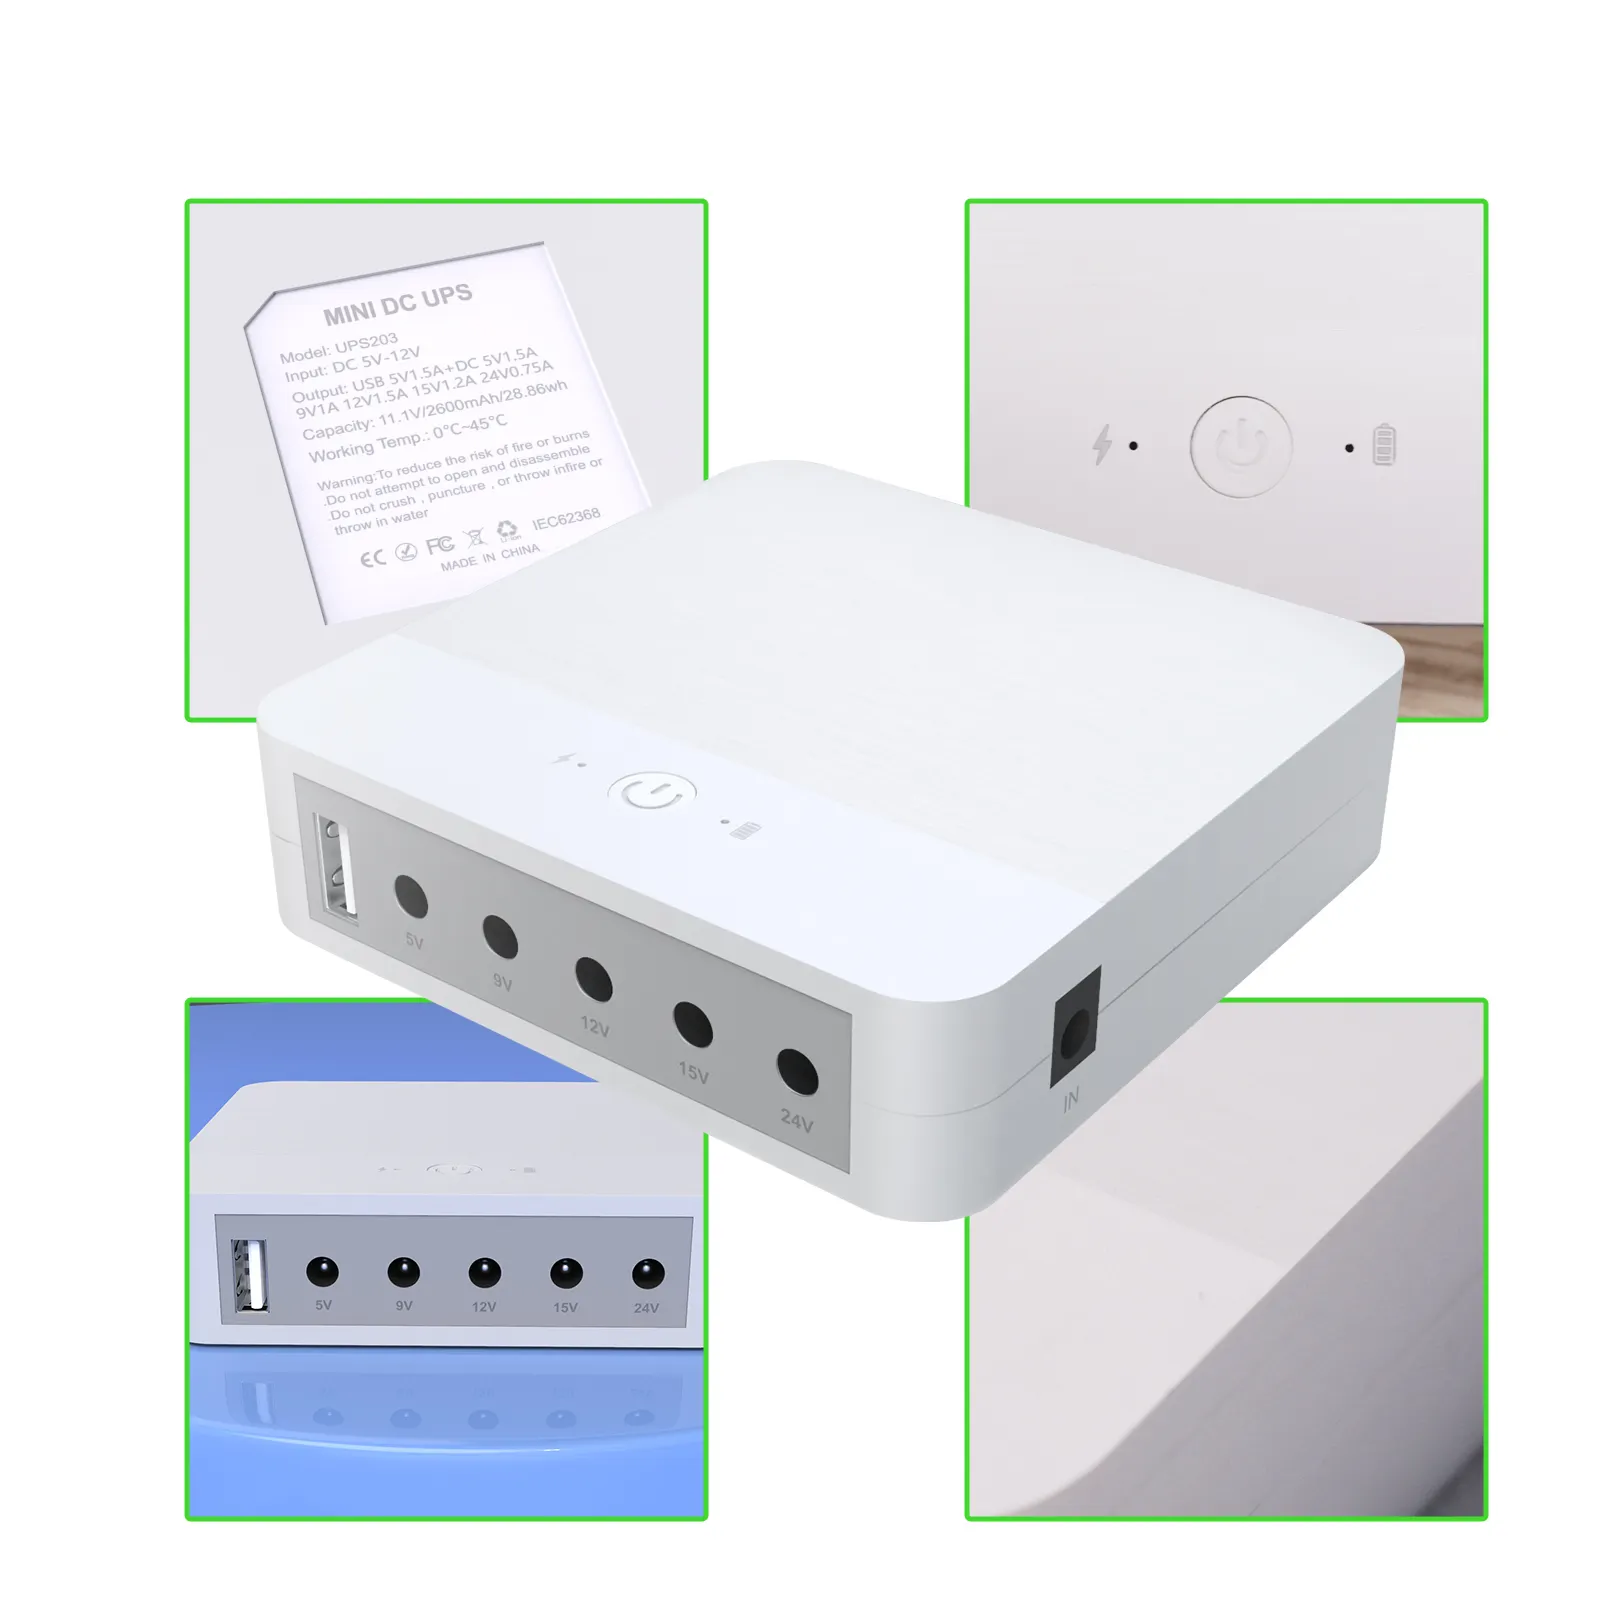 WGP mini ups6出力ポート12v 9v 5v 2a mini dc ups for network internet television tv control box